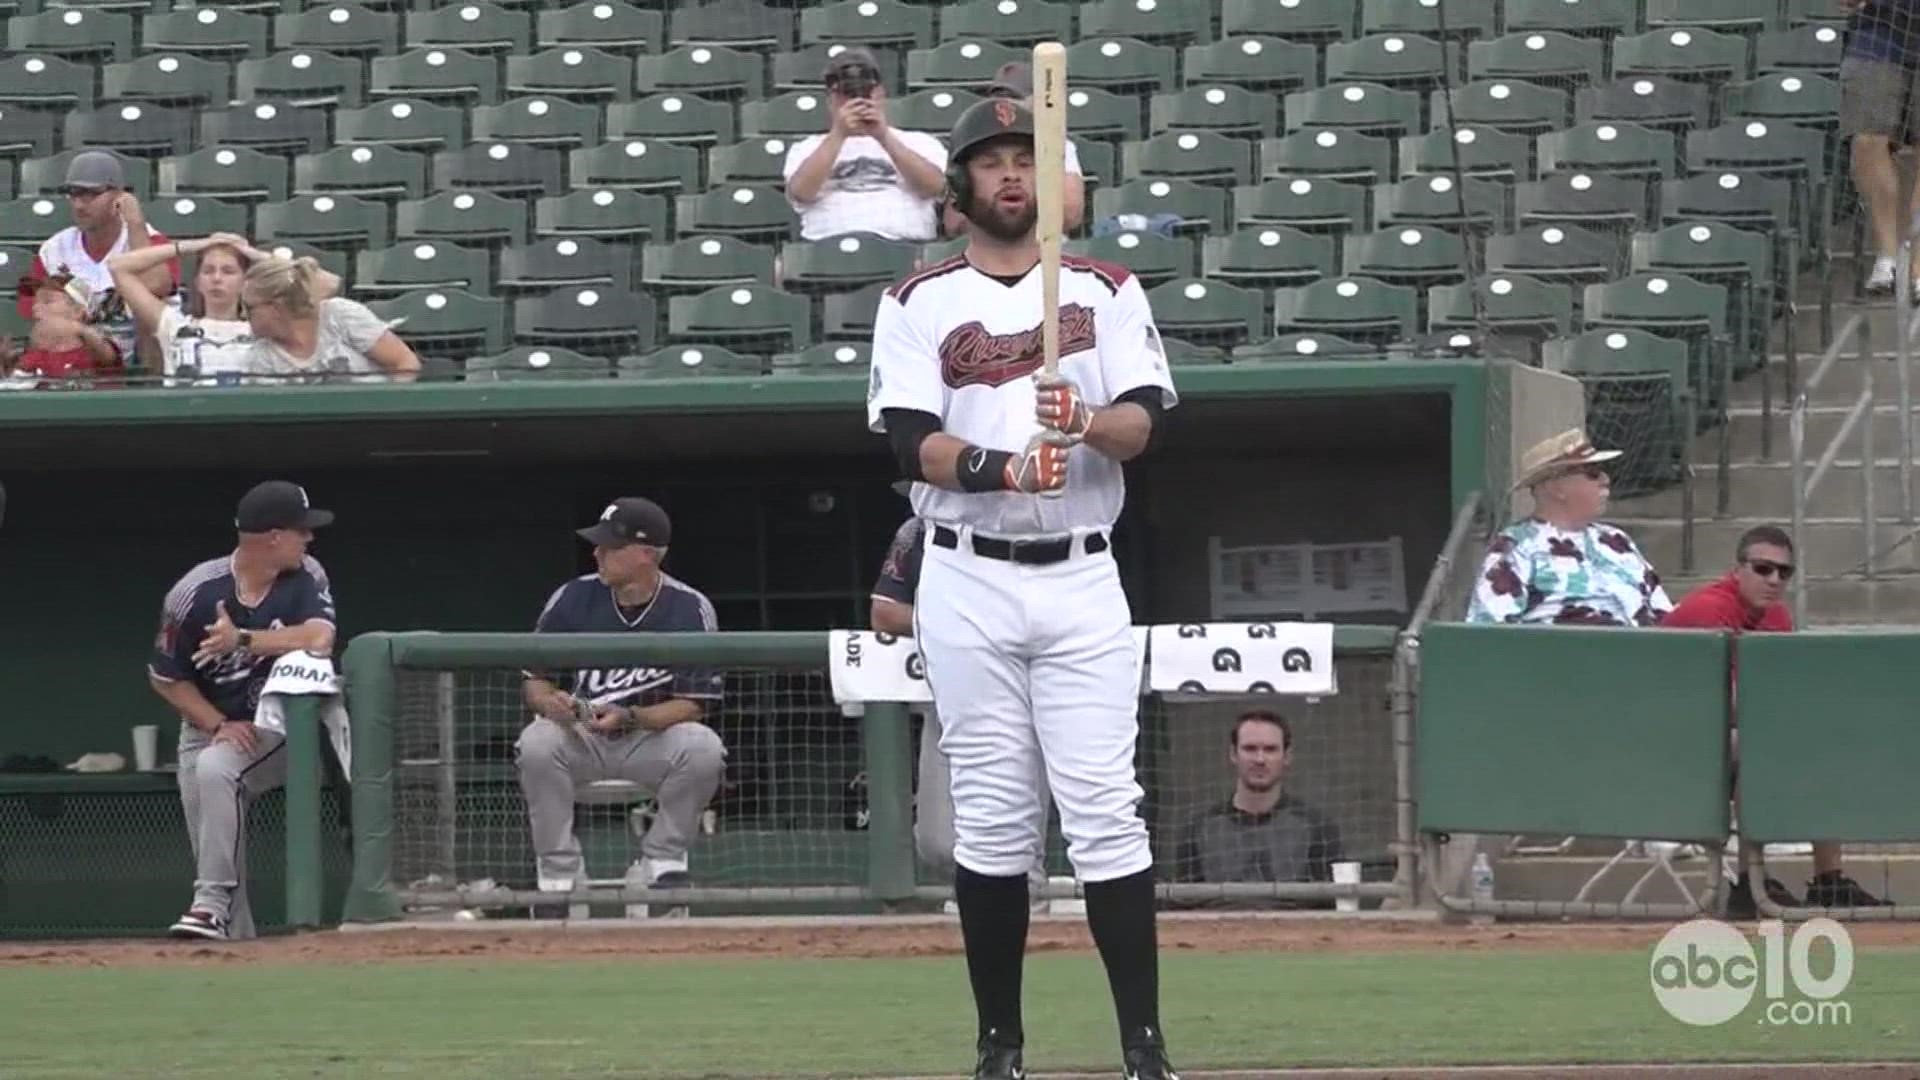 San Francisco Giants star Brandon Belt rehabs a knee injury with Triple-A Sacramento, goes 0-for-3 on Monday with the River Cats.